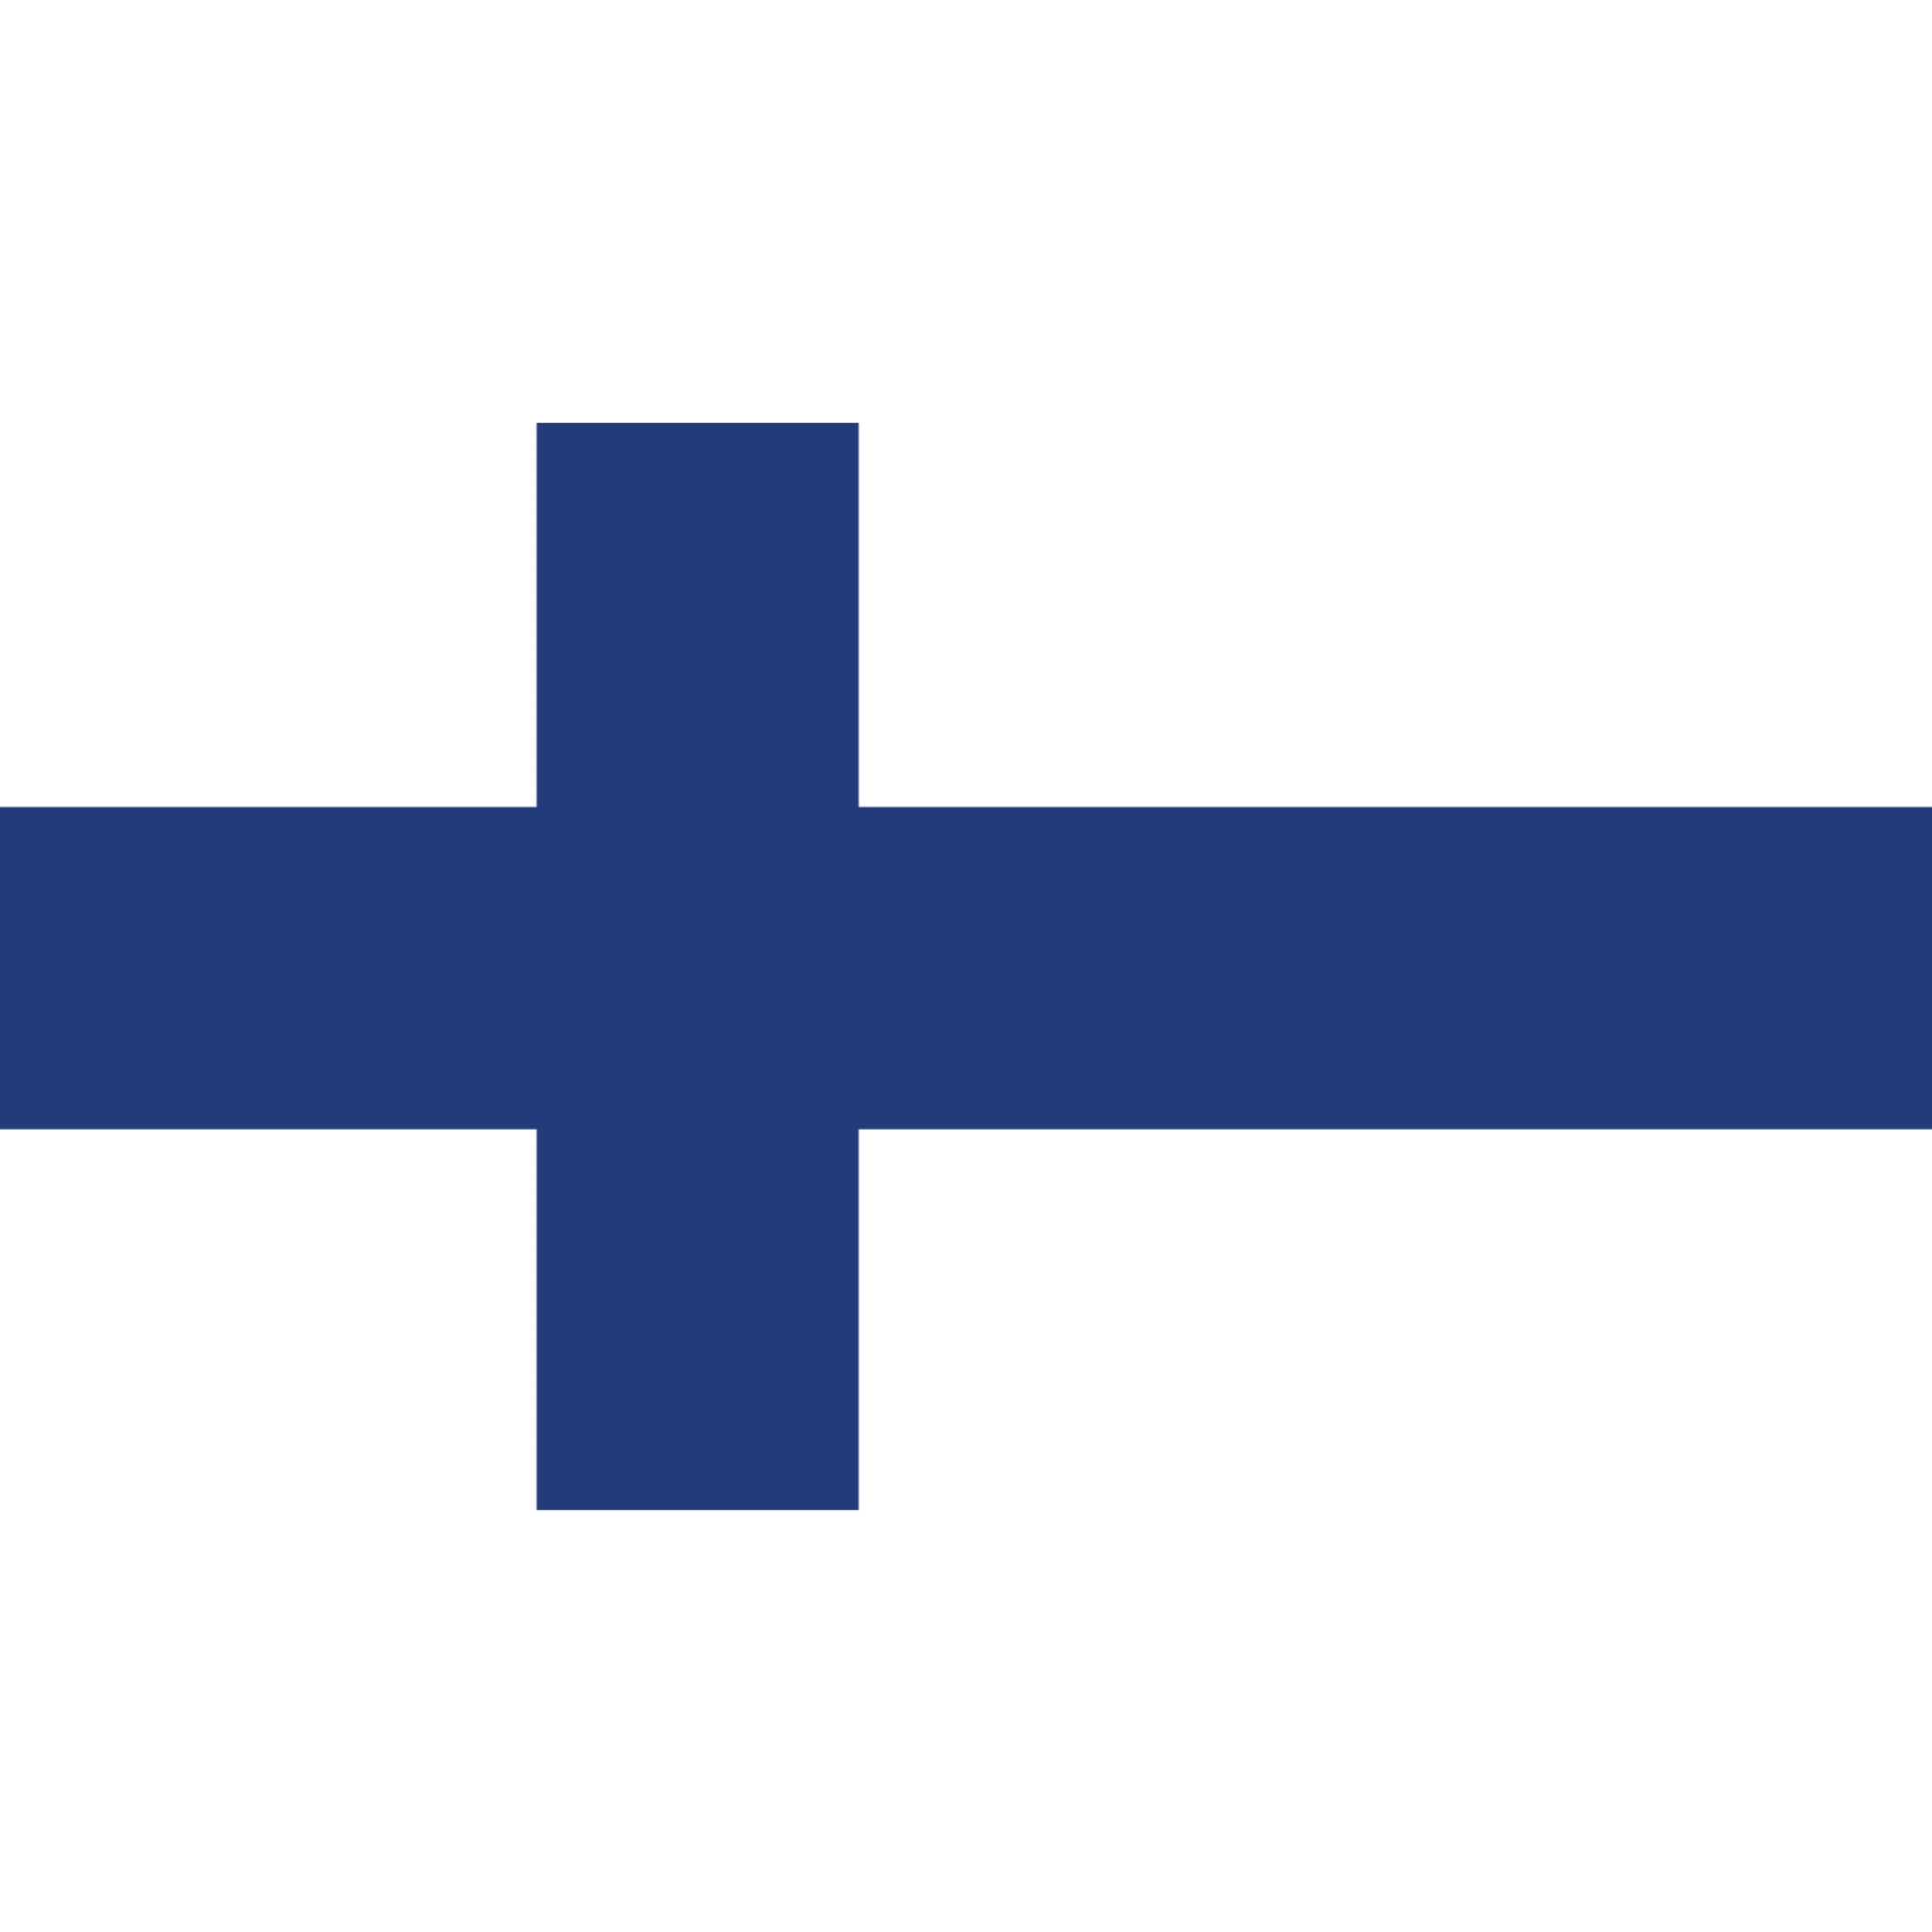 The flag of Finland has a white background with a navy blue cross off centre to the left.